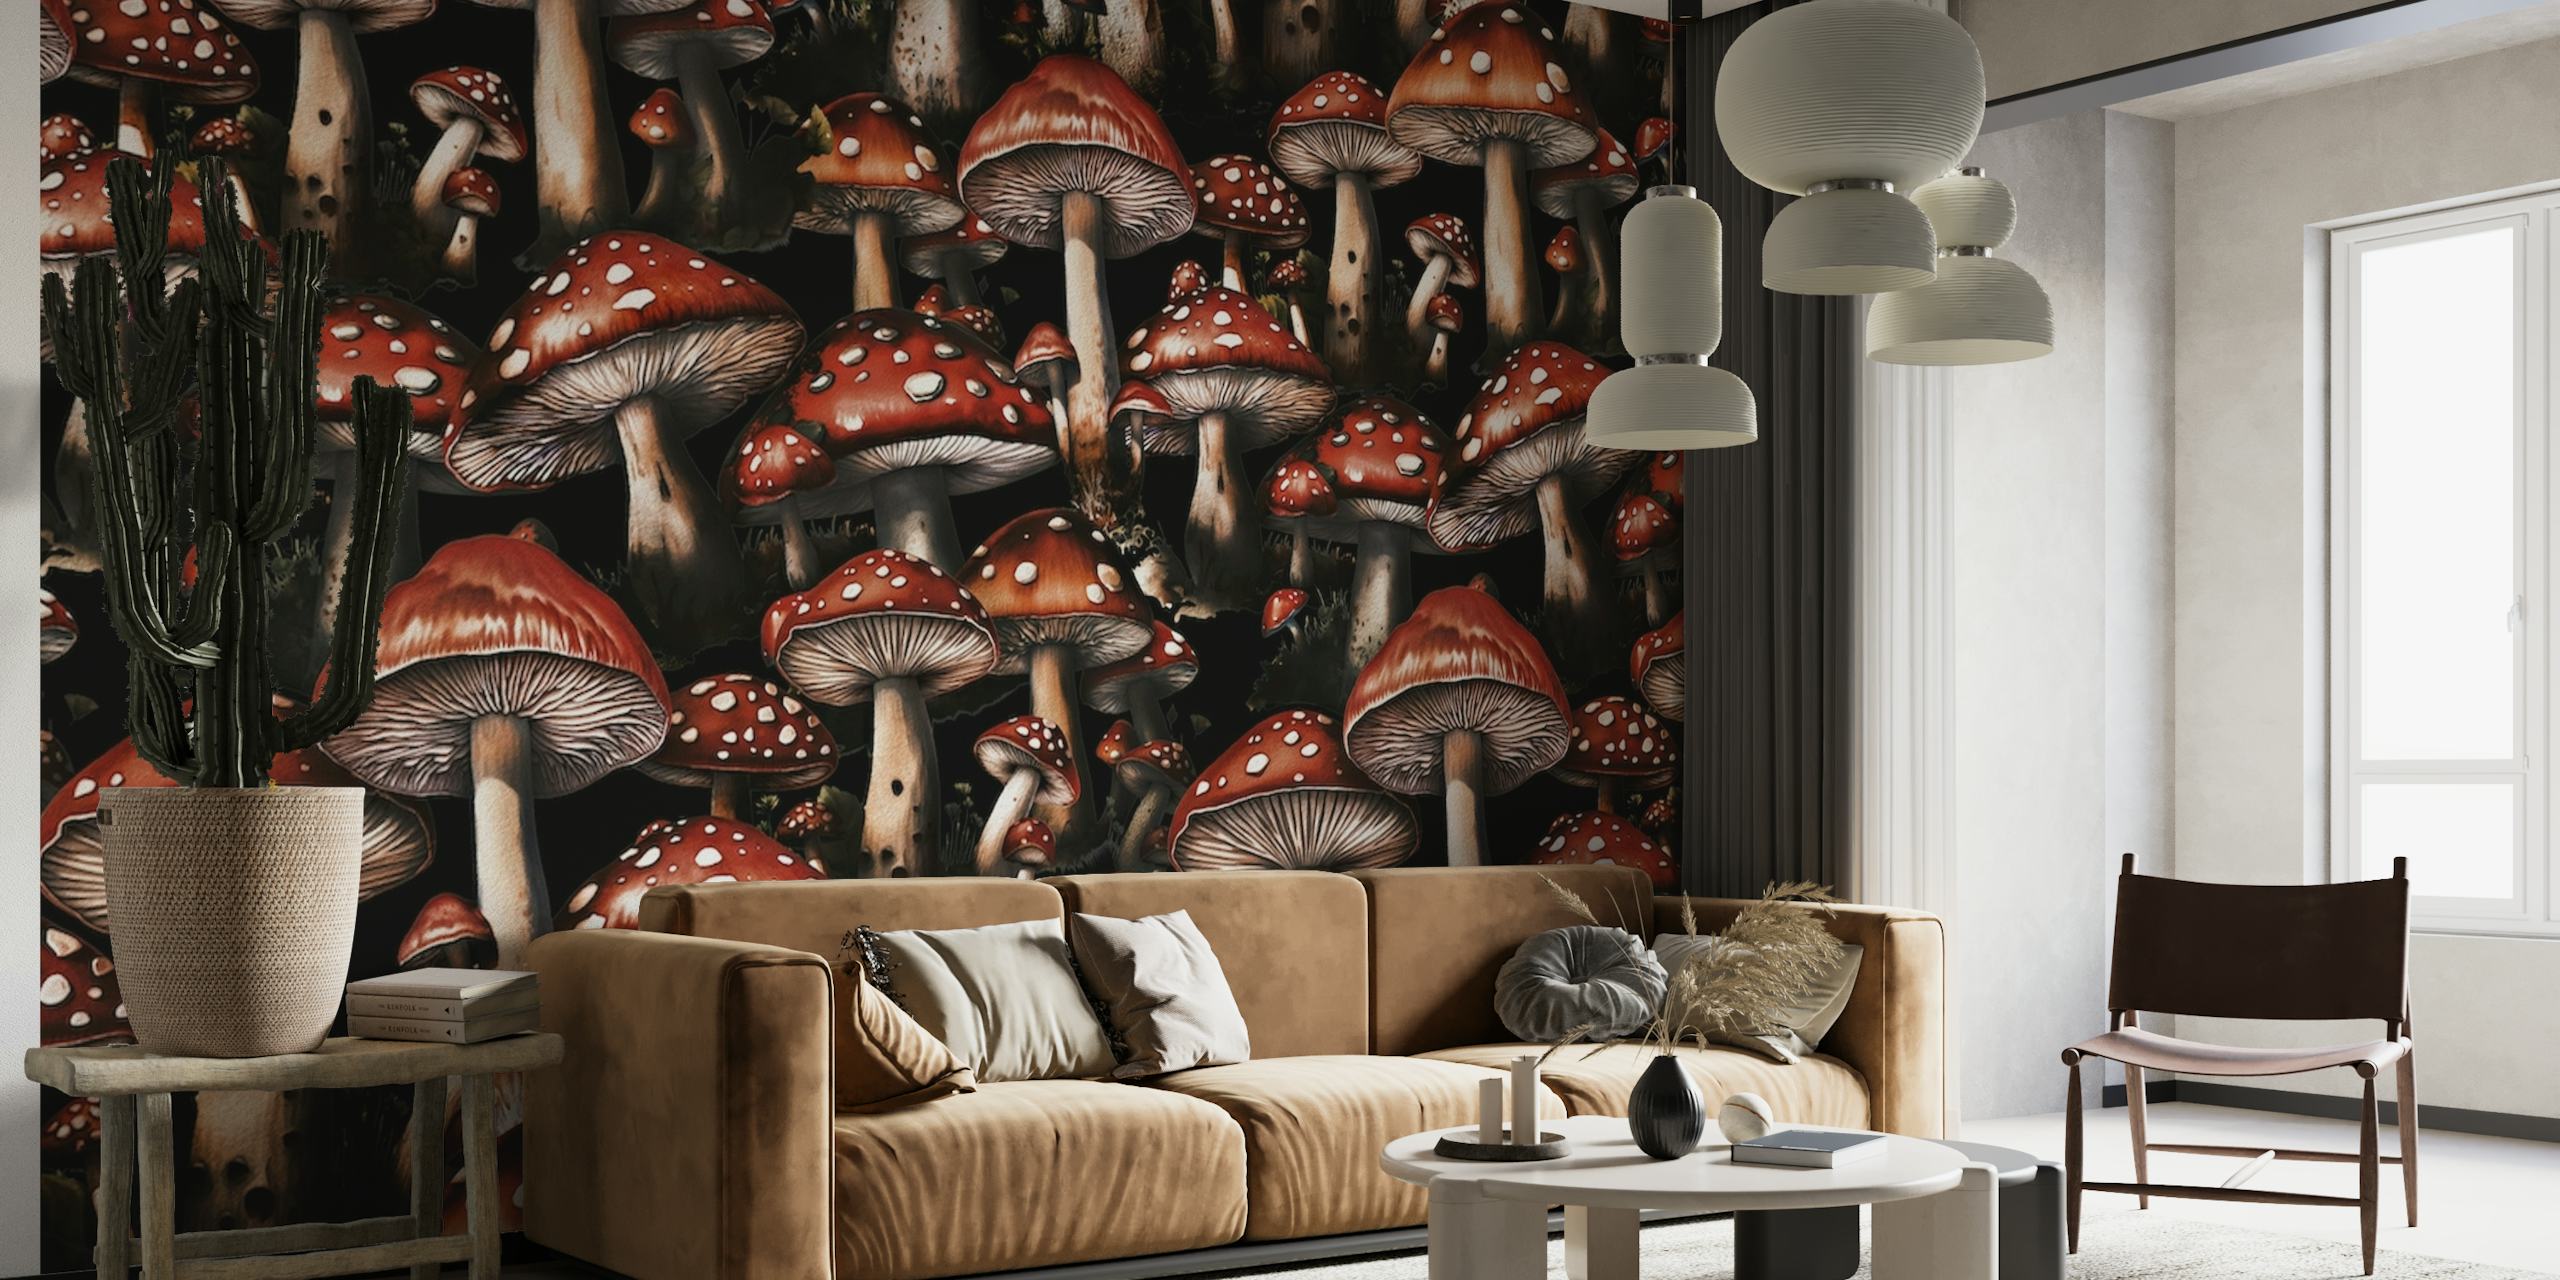 Fantasy mushroom wall mural with red-capped mushrooms on dark backdrop for home decor.